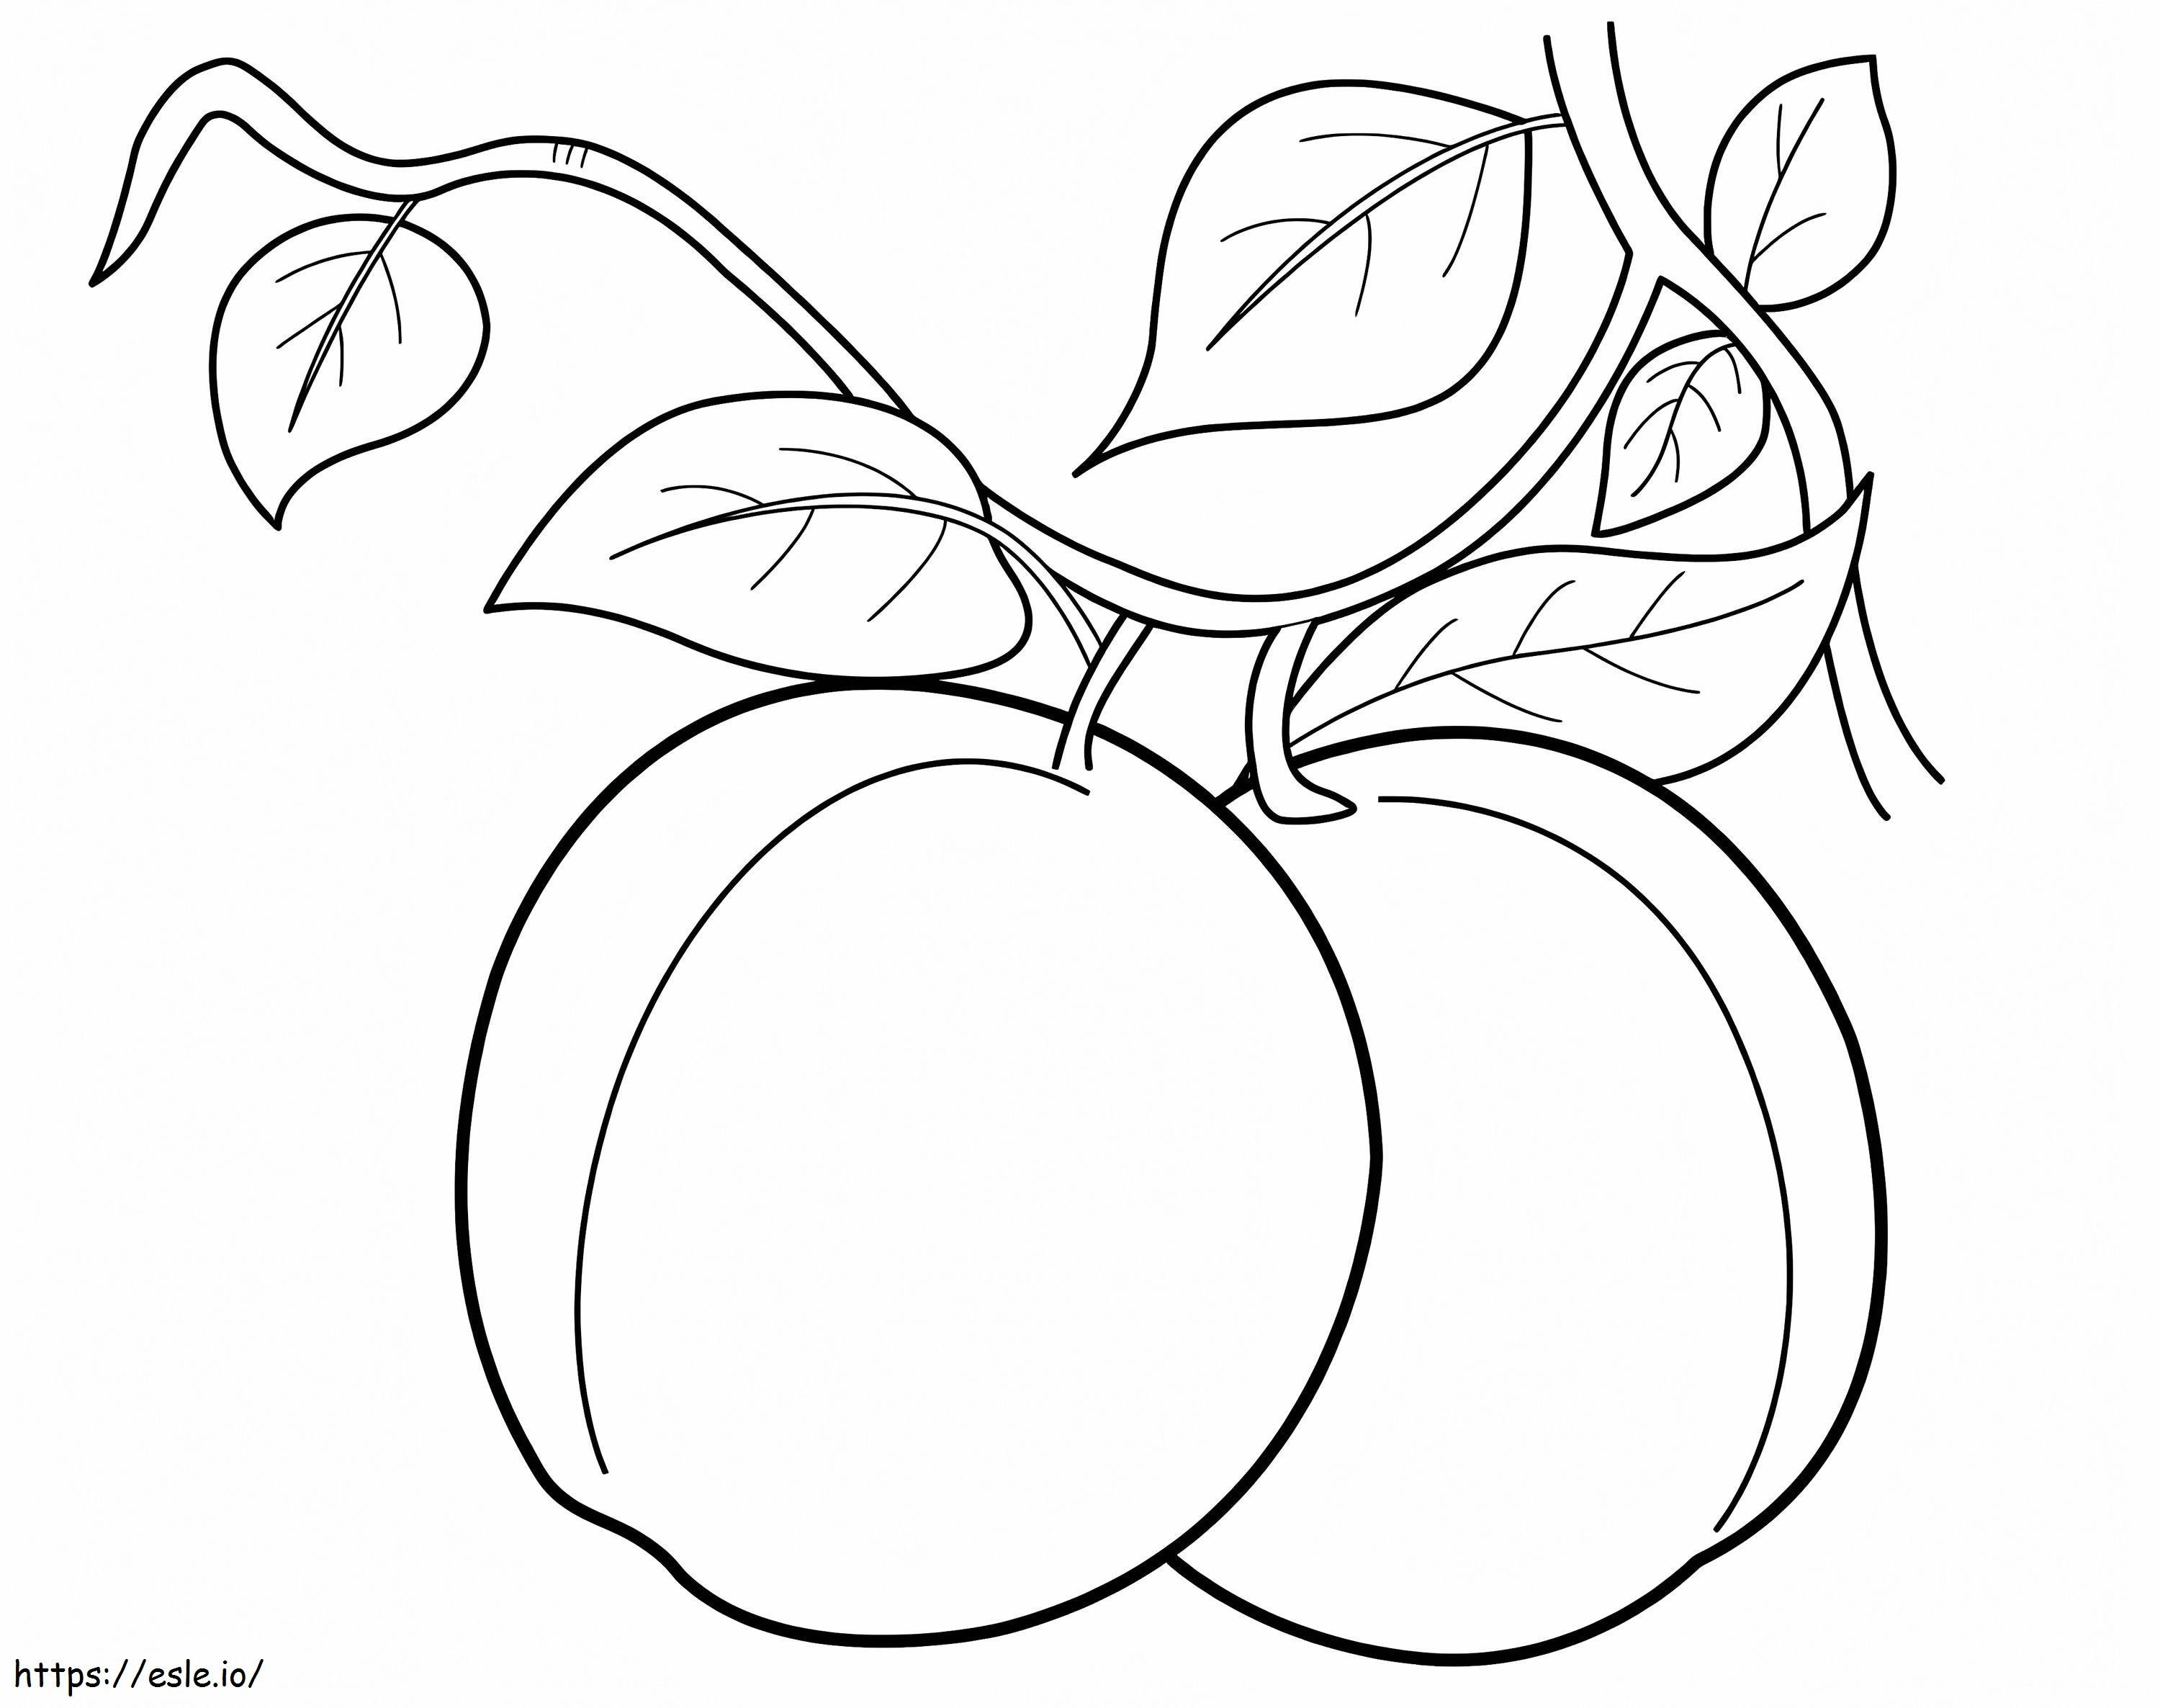 Two Peaches coloring page